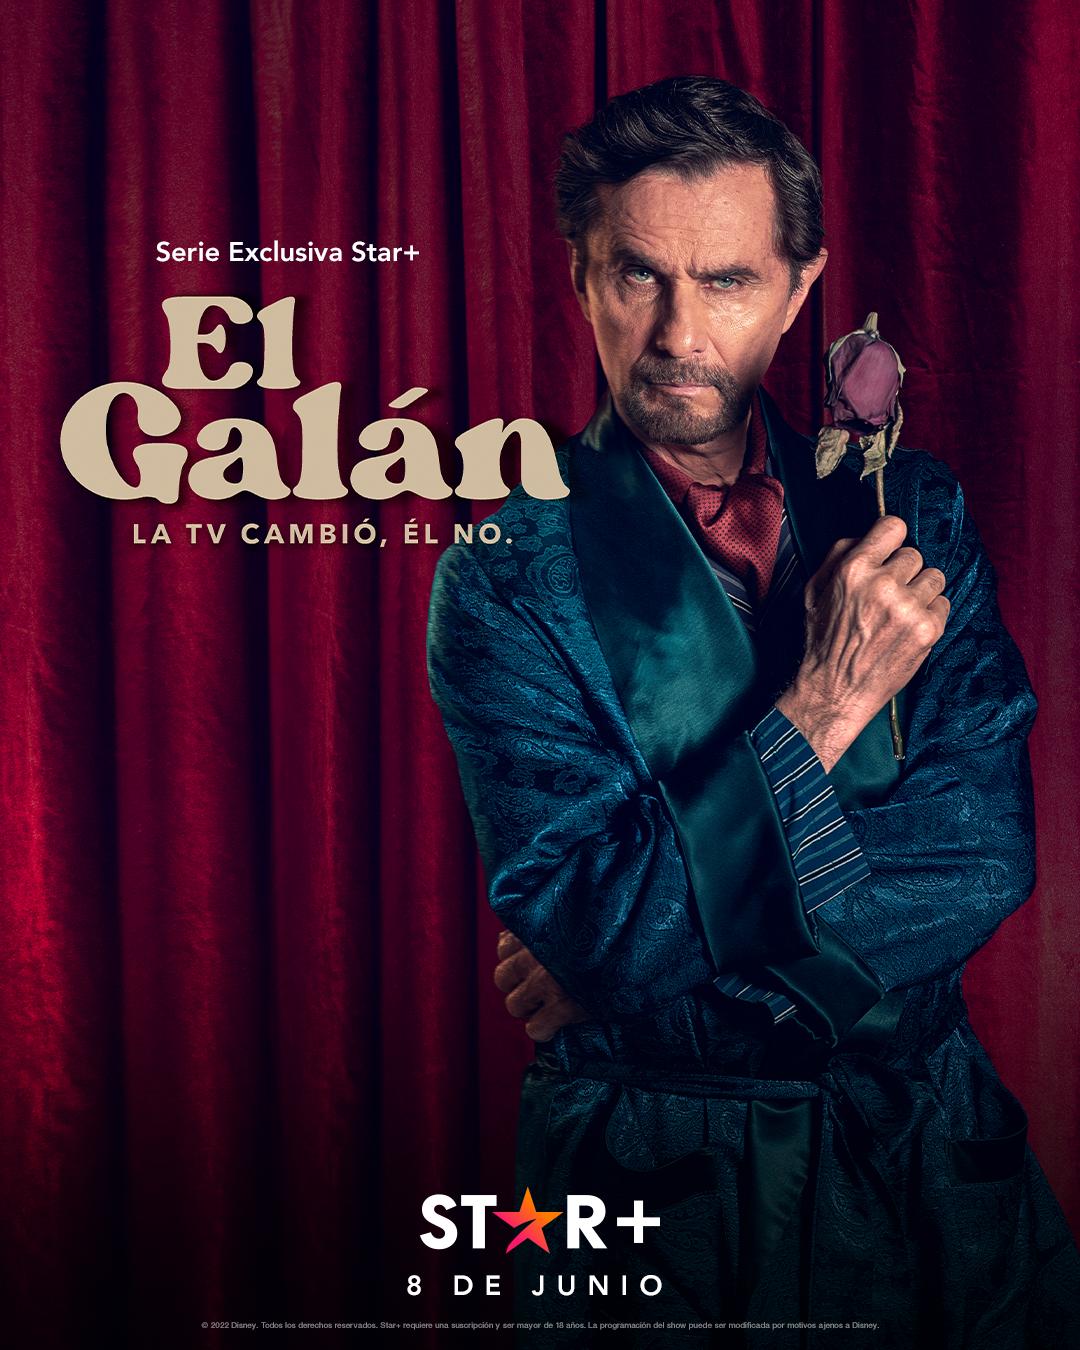 TV ratings for The Gallant. TV Changed, He Didn't (El Galán. La Tv Cambió, Él No) in New Zealand. Star+ TV series